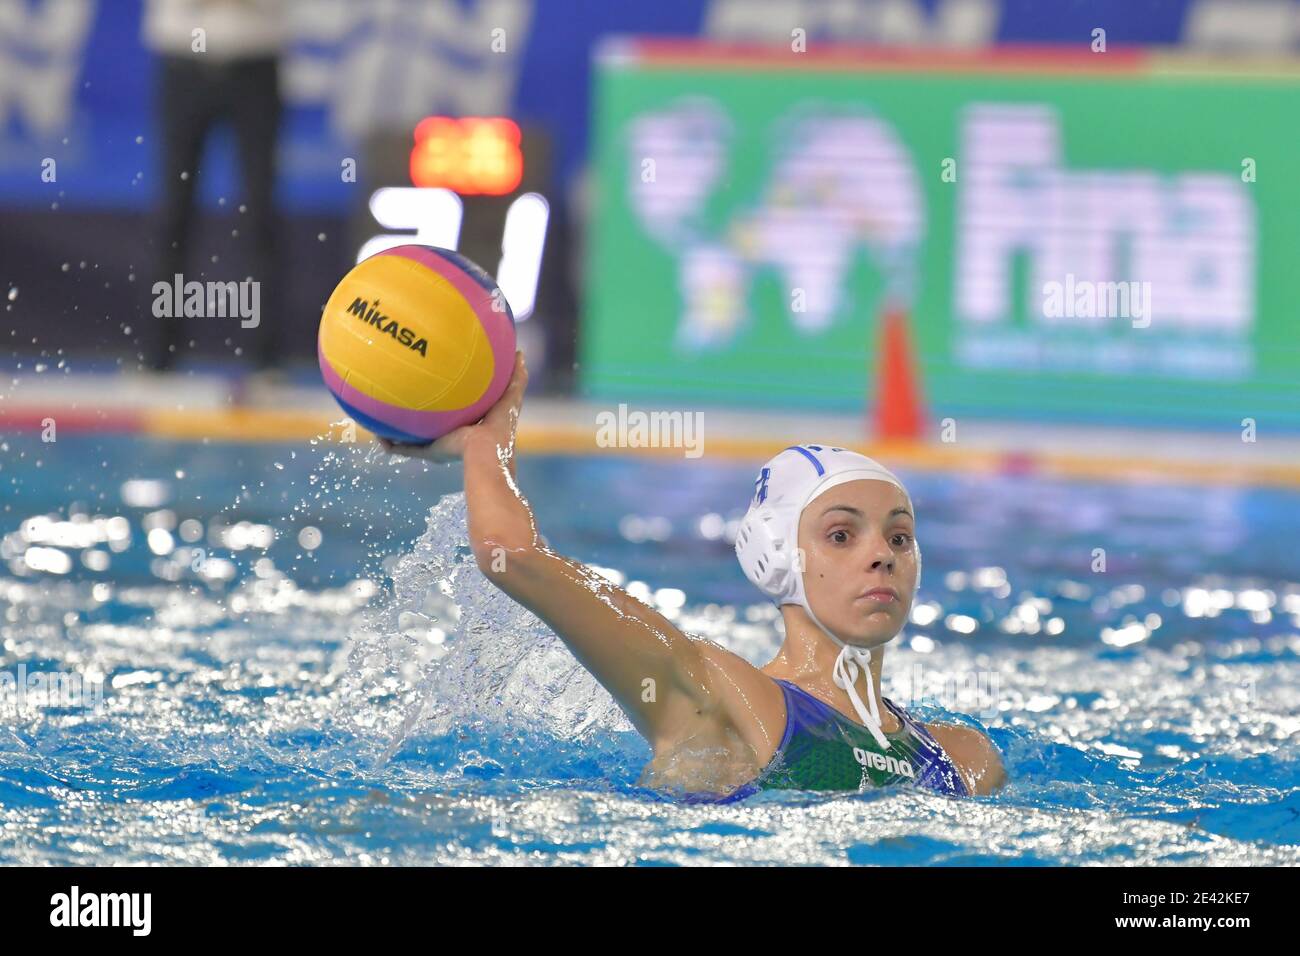 Federal Center B. Bianchi, Trieste, Italy, 21 Jan 2021, 3 GARIBOTTI Arianna [ROLE: Wing] (Italy) during Women&#39;s Waterpolo Olympic Game Qualification Tournament - Italy vs Slovakia, Olympic Games - Photo Marco Todaro / LM Stock Photo